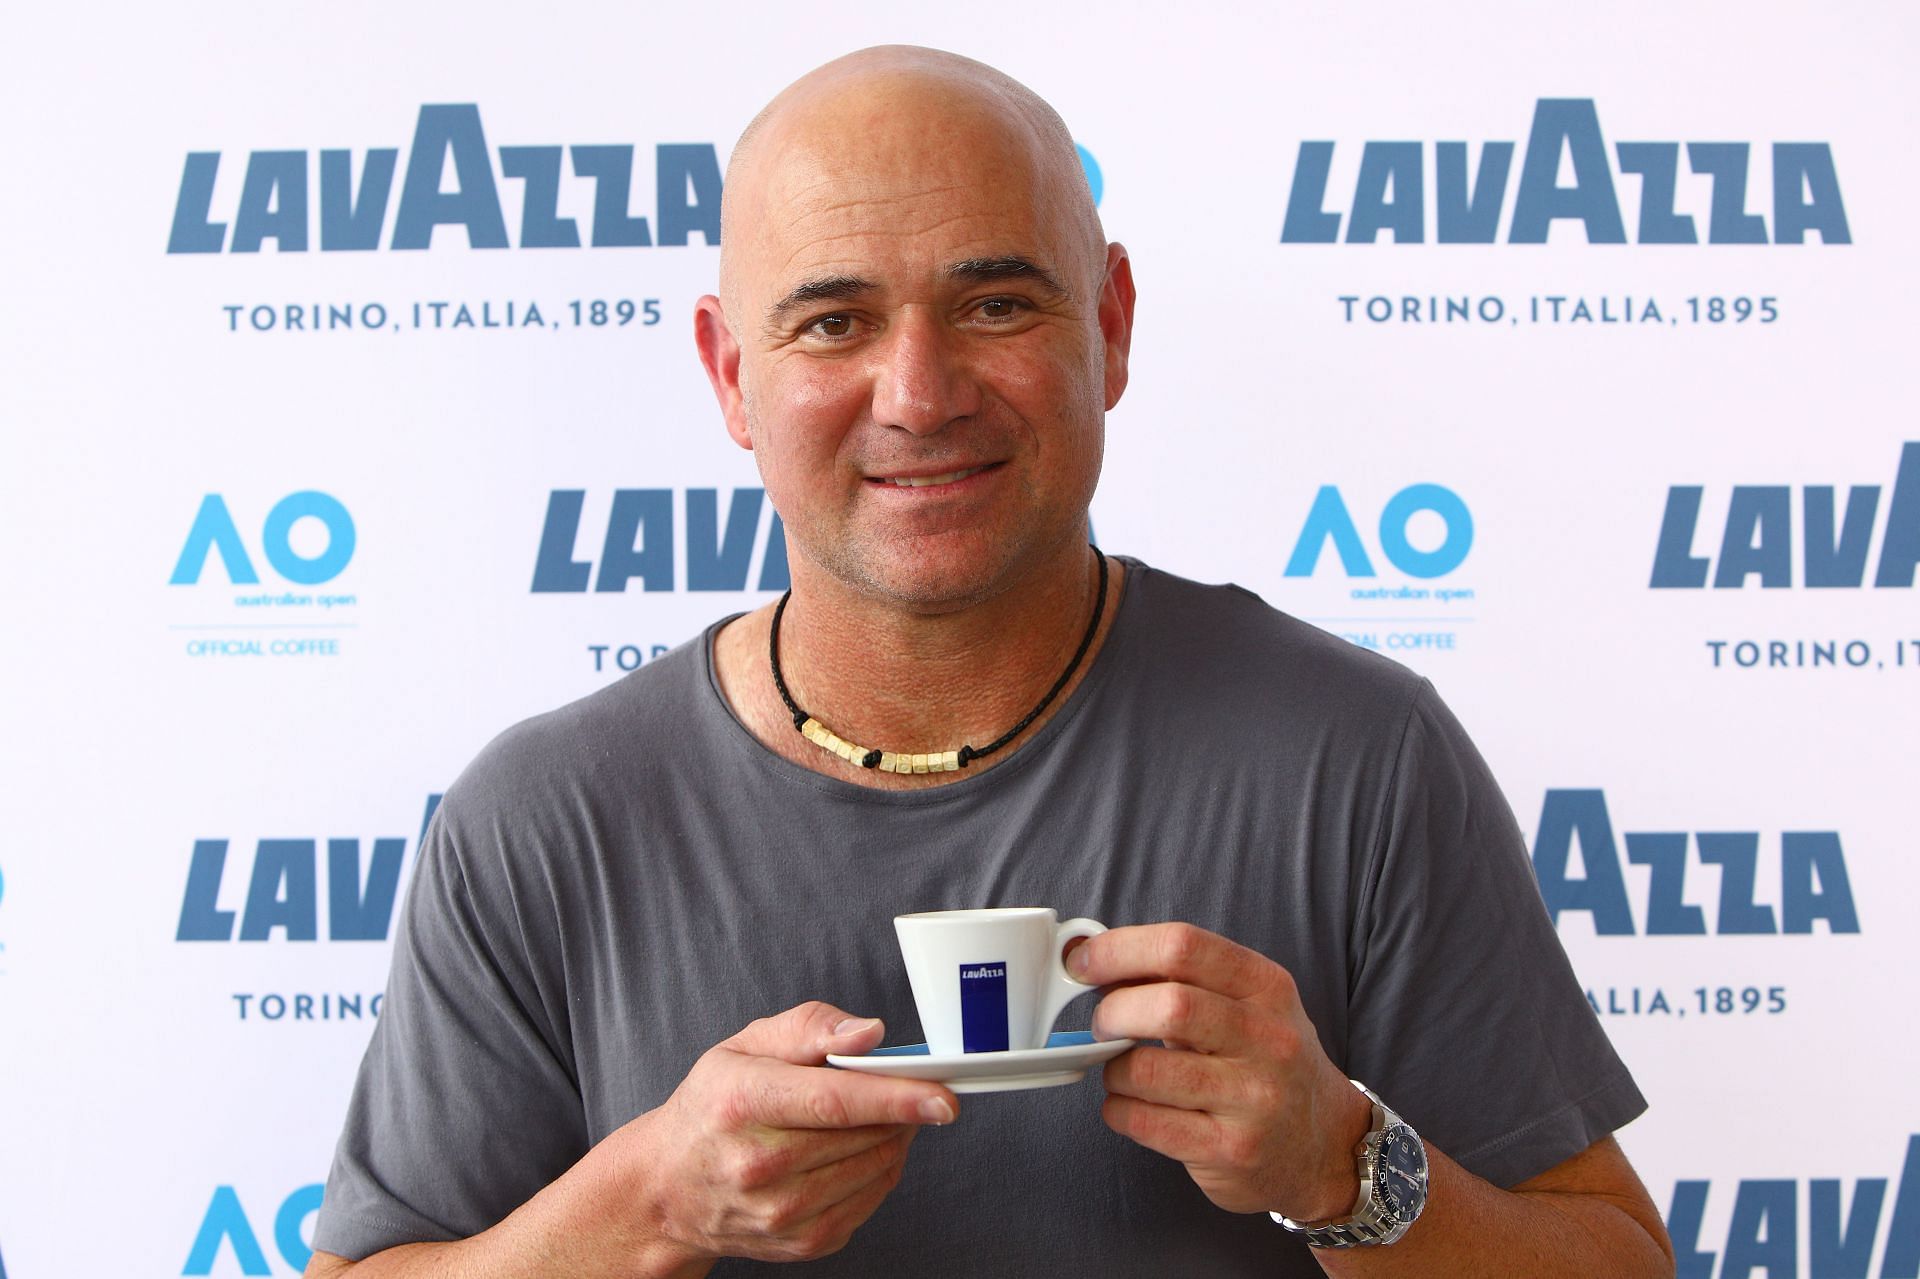 Andre Agassi was yet to retire when Nadal failed to reach a clay Masters 1000 final in 2004